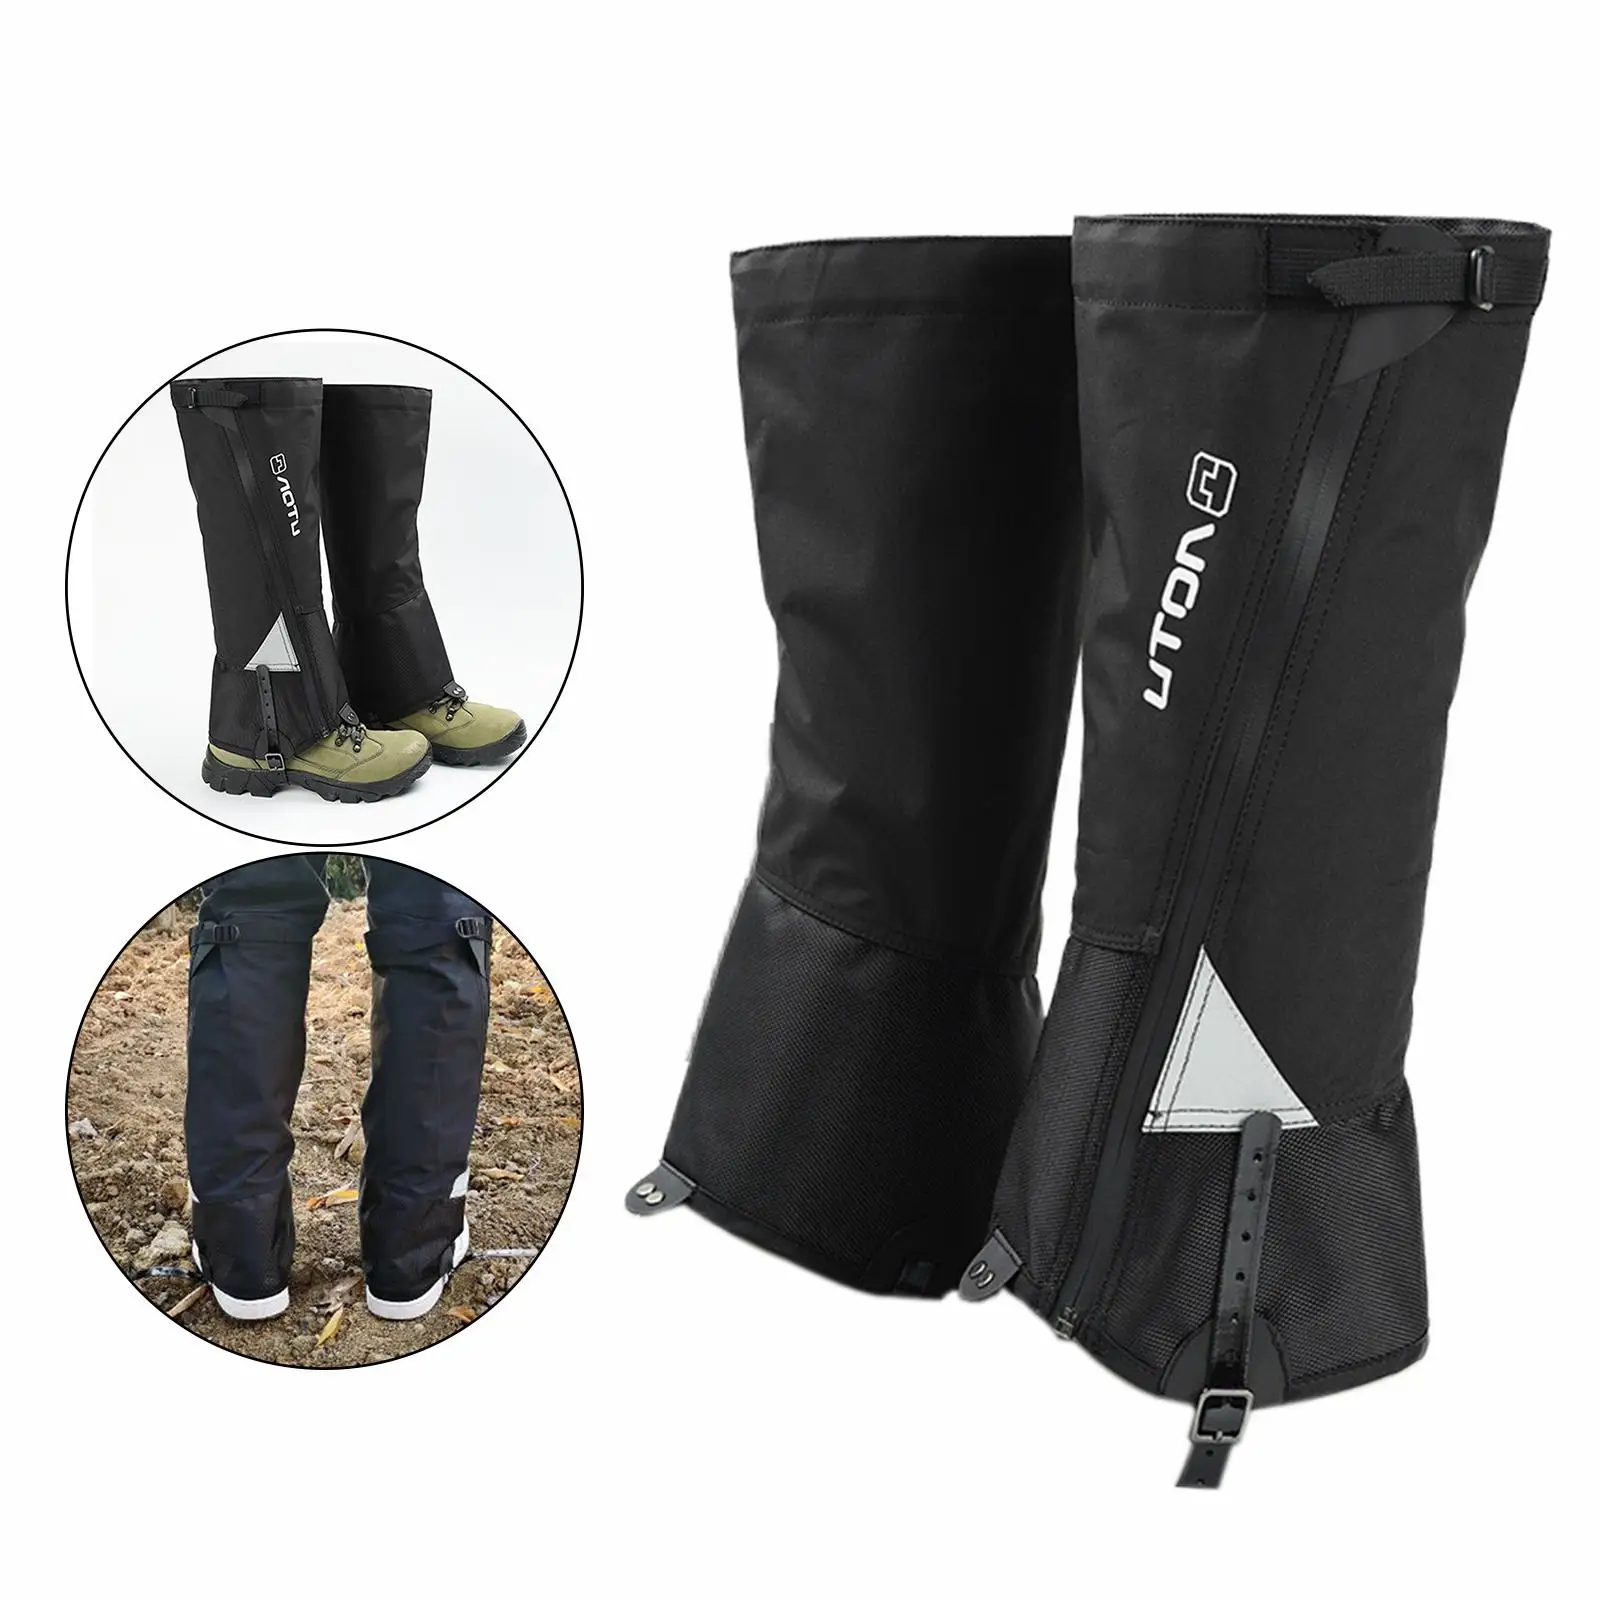 Adjustable Leg Gaiters Waterproof  Durable Cover for Climbing Outdoor Sports